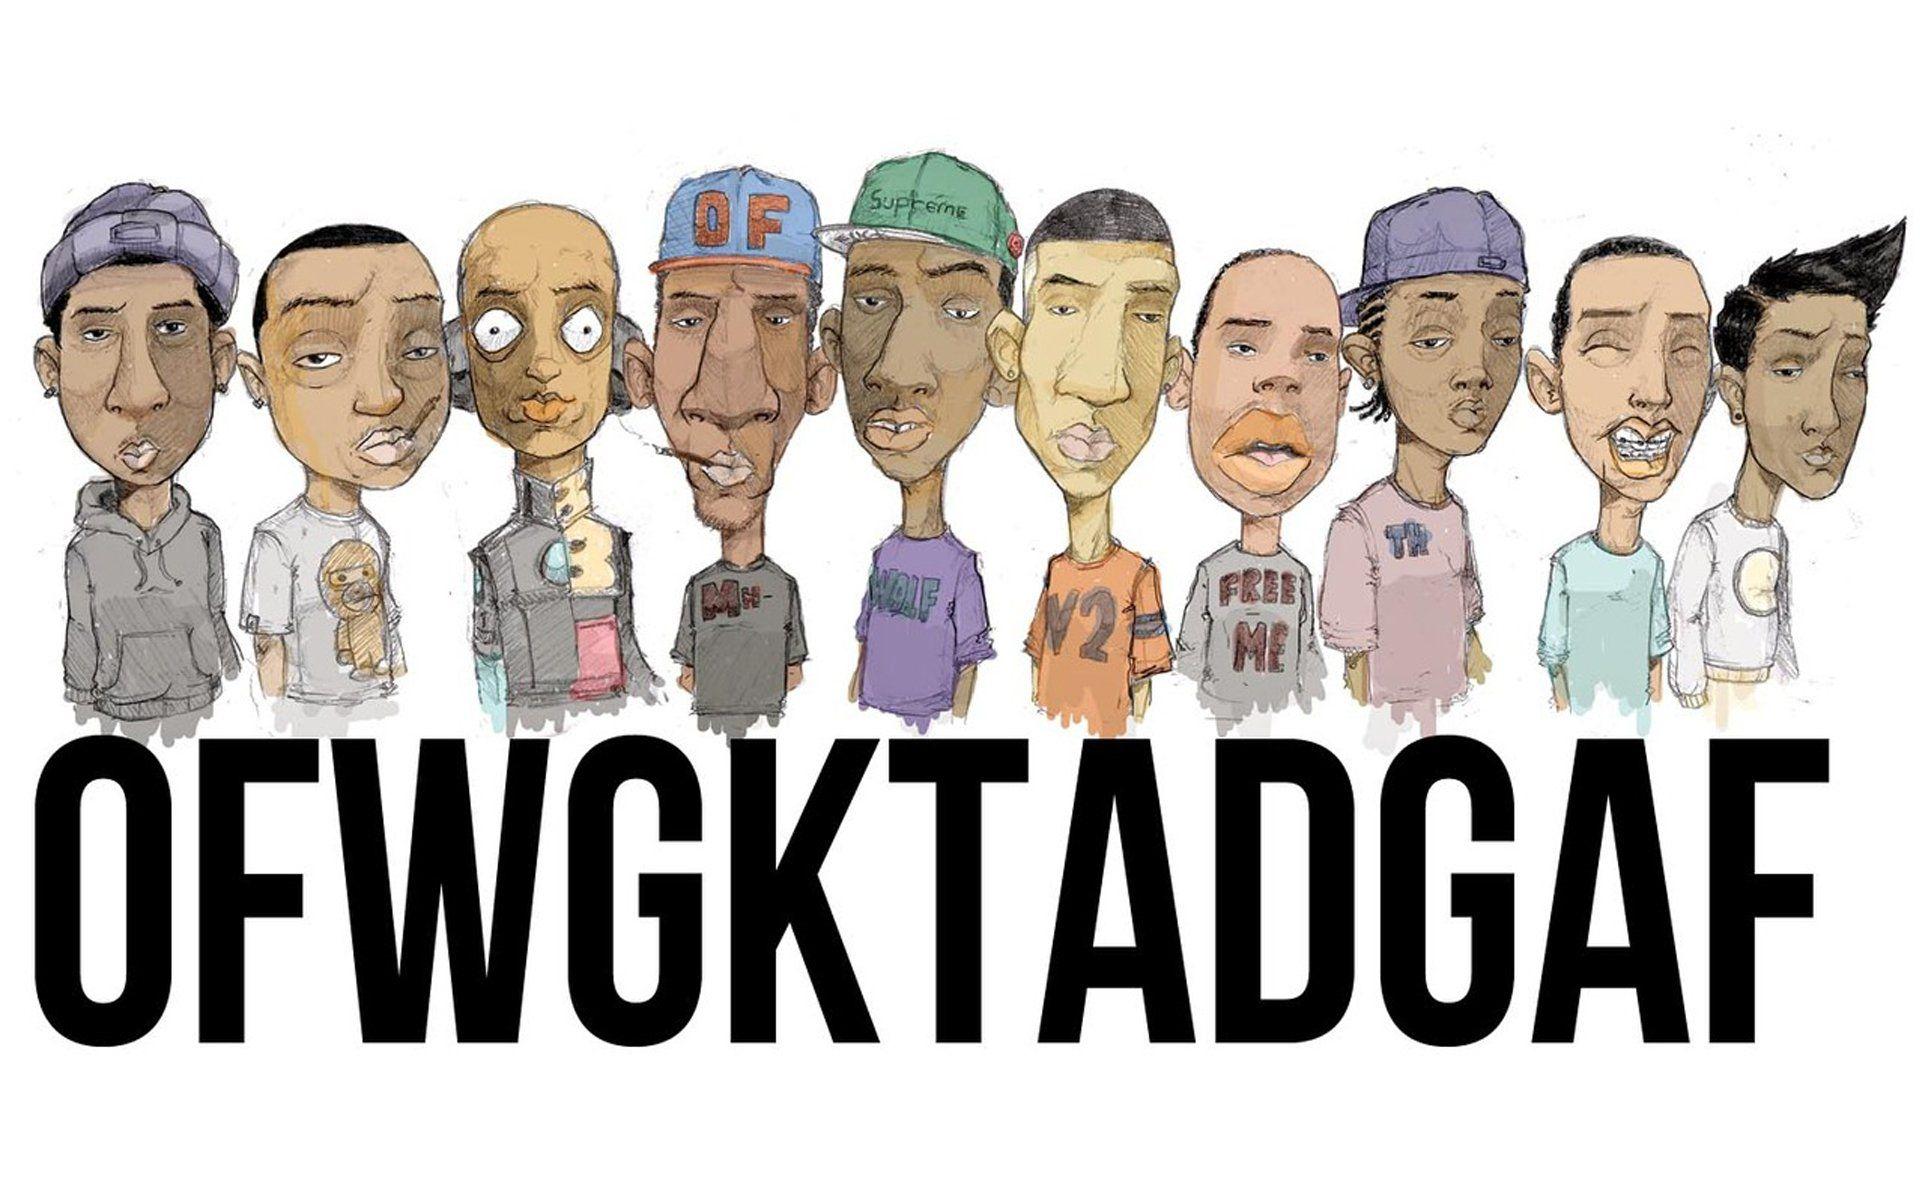 Odd Future Backpack Ebay Wallpapers